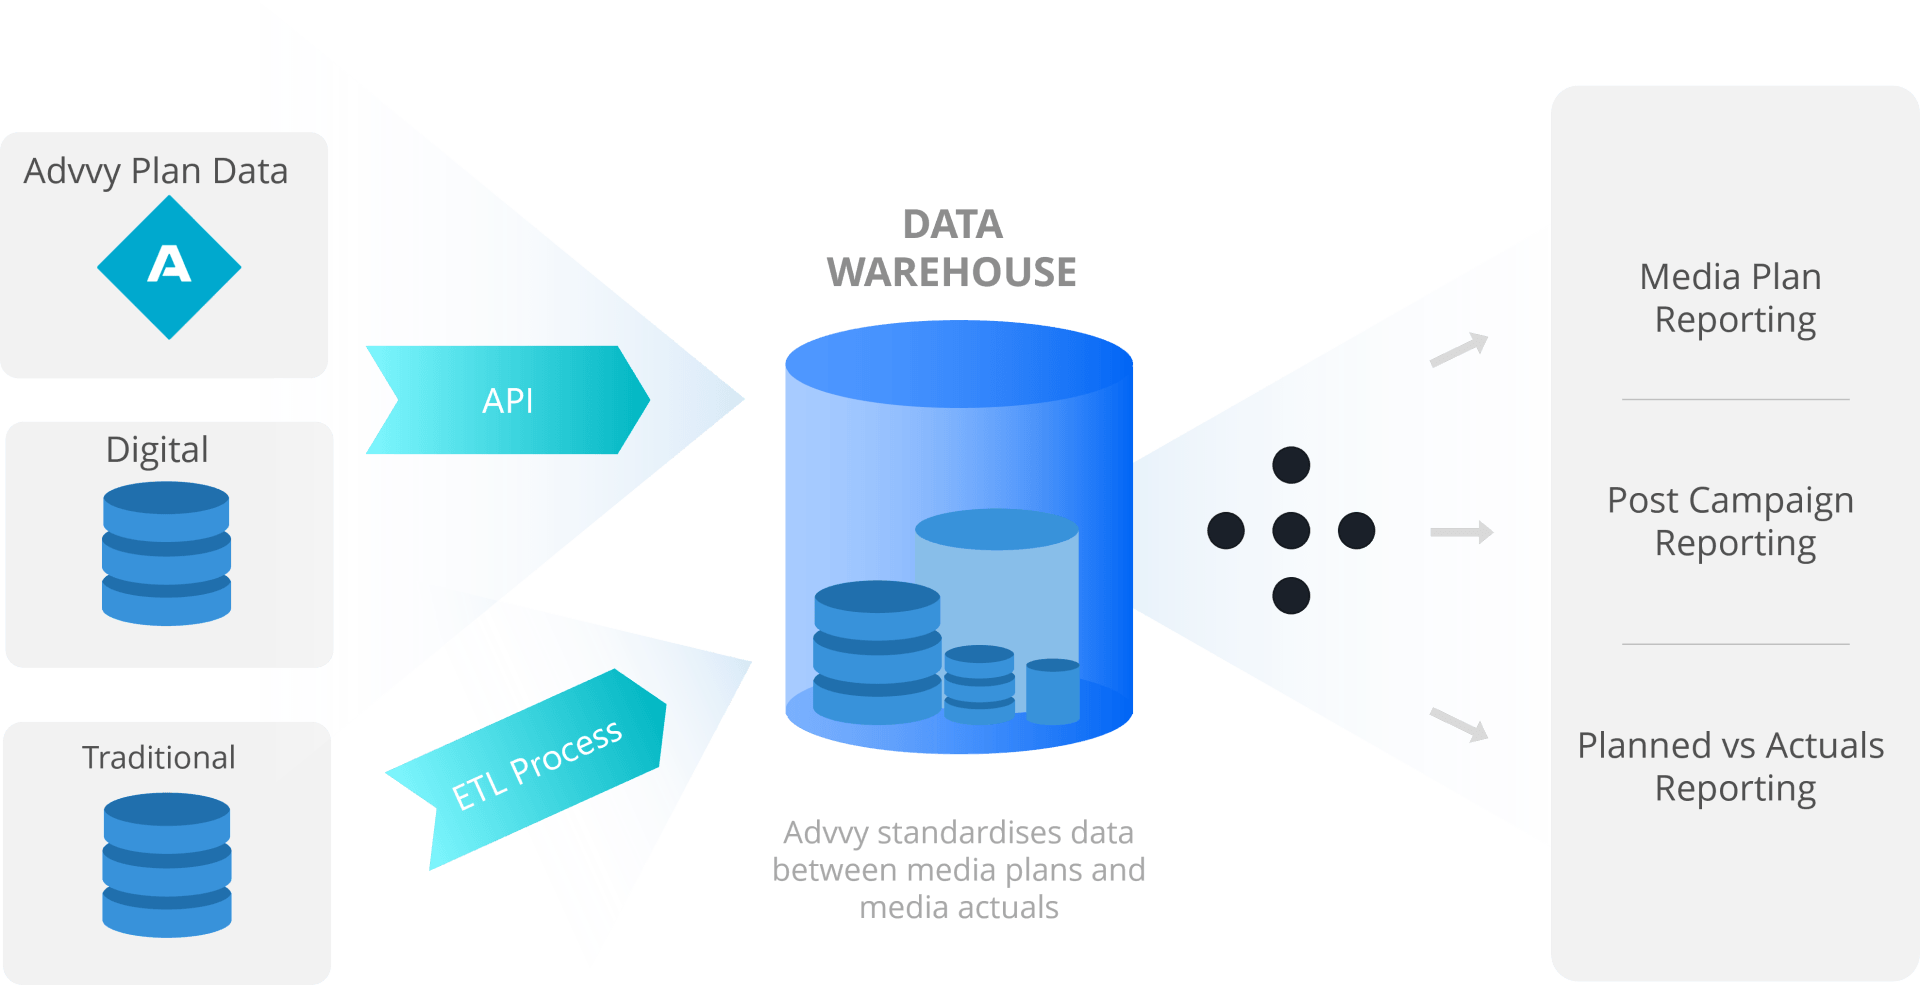 Architecture of post campaign data management solution with Advvy Advvy